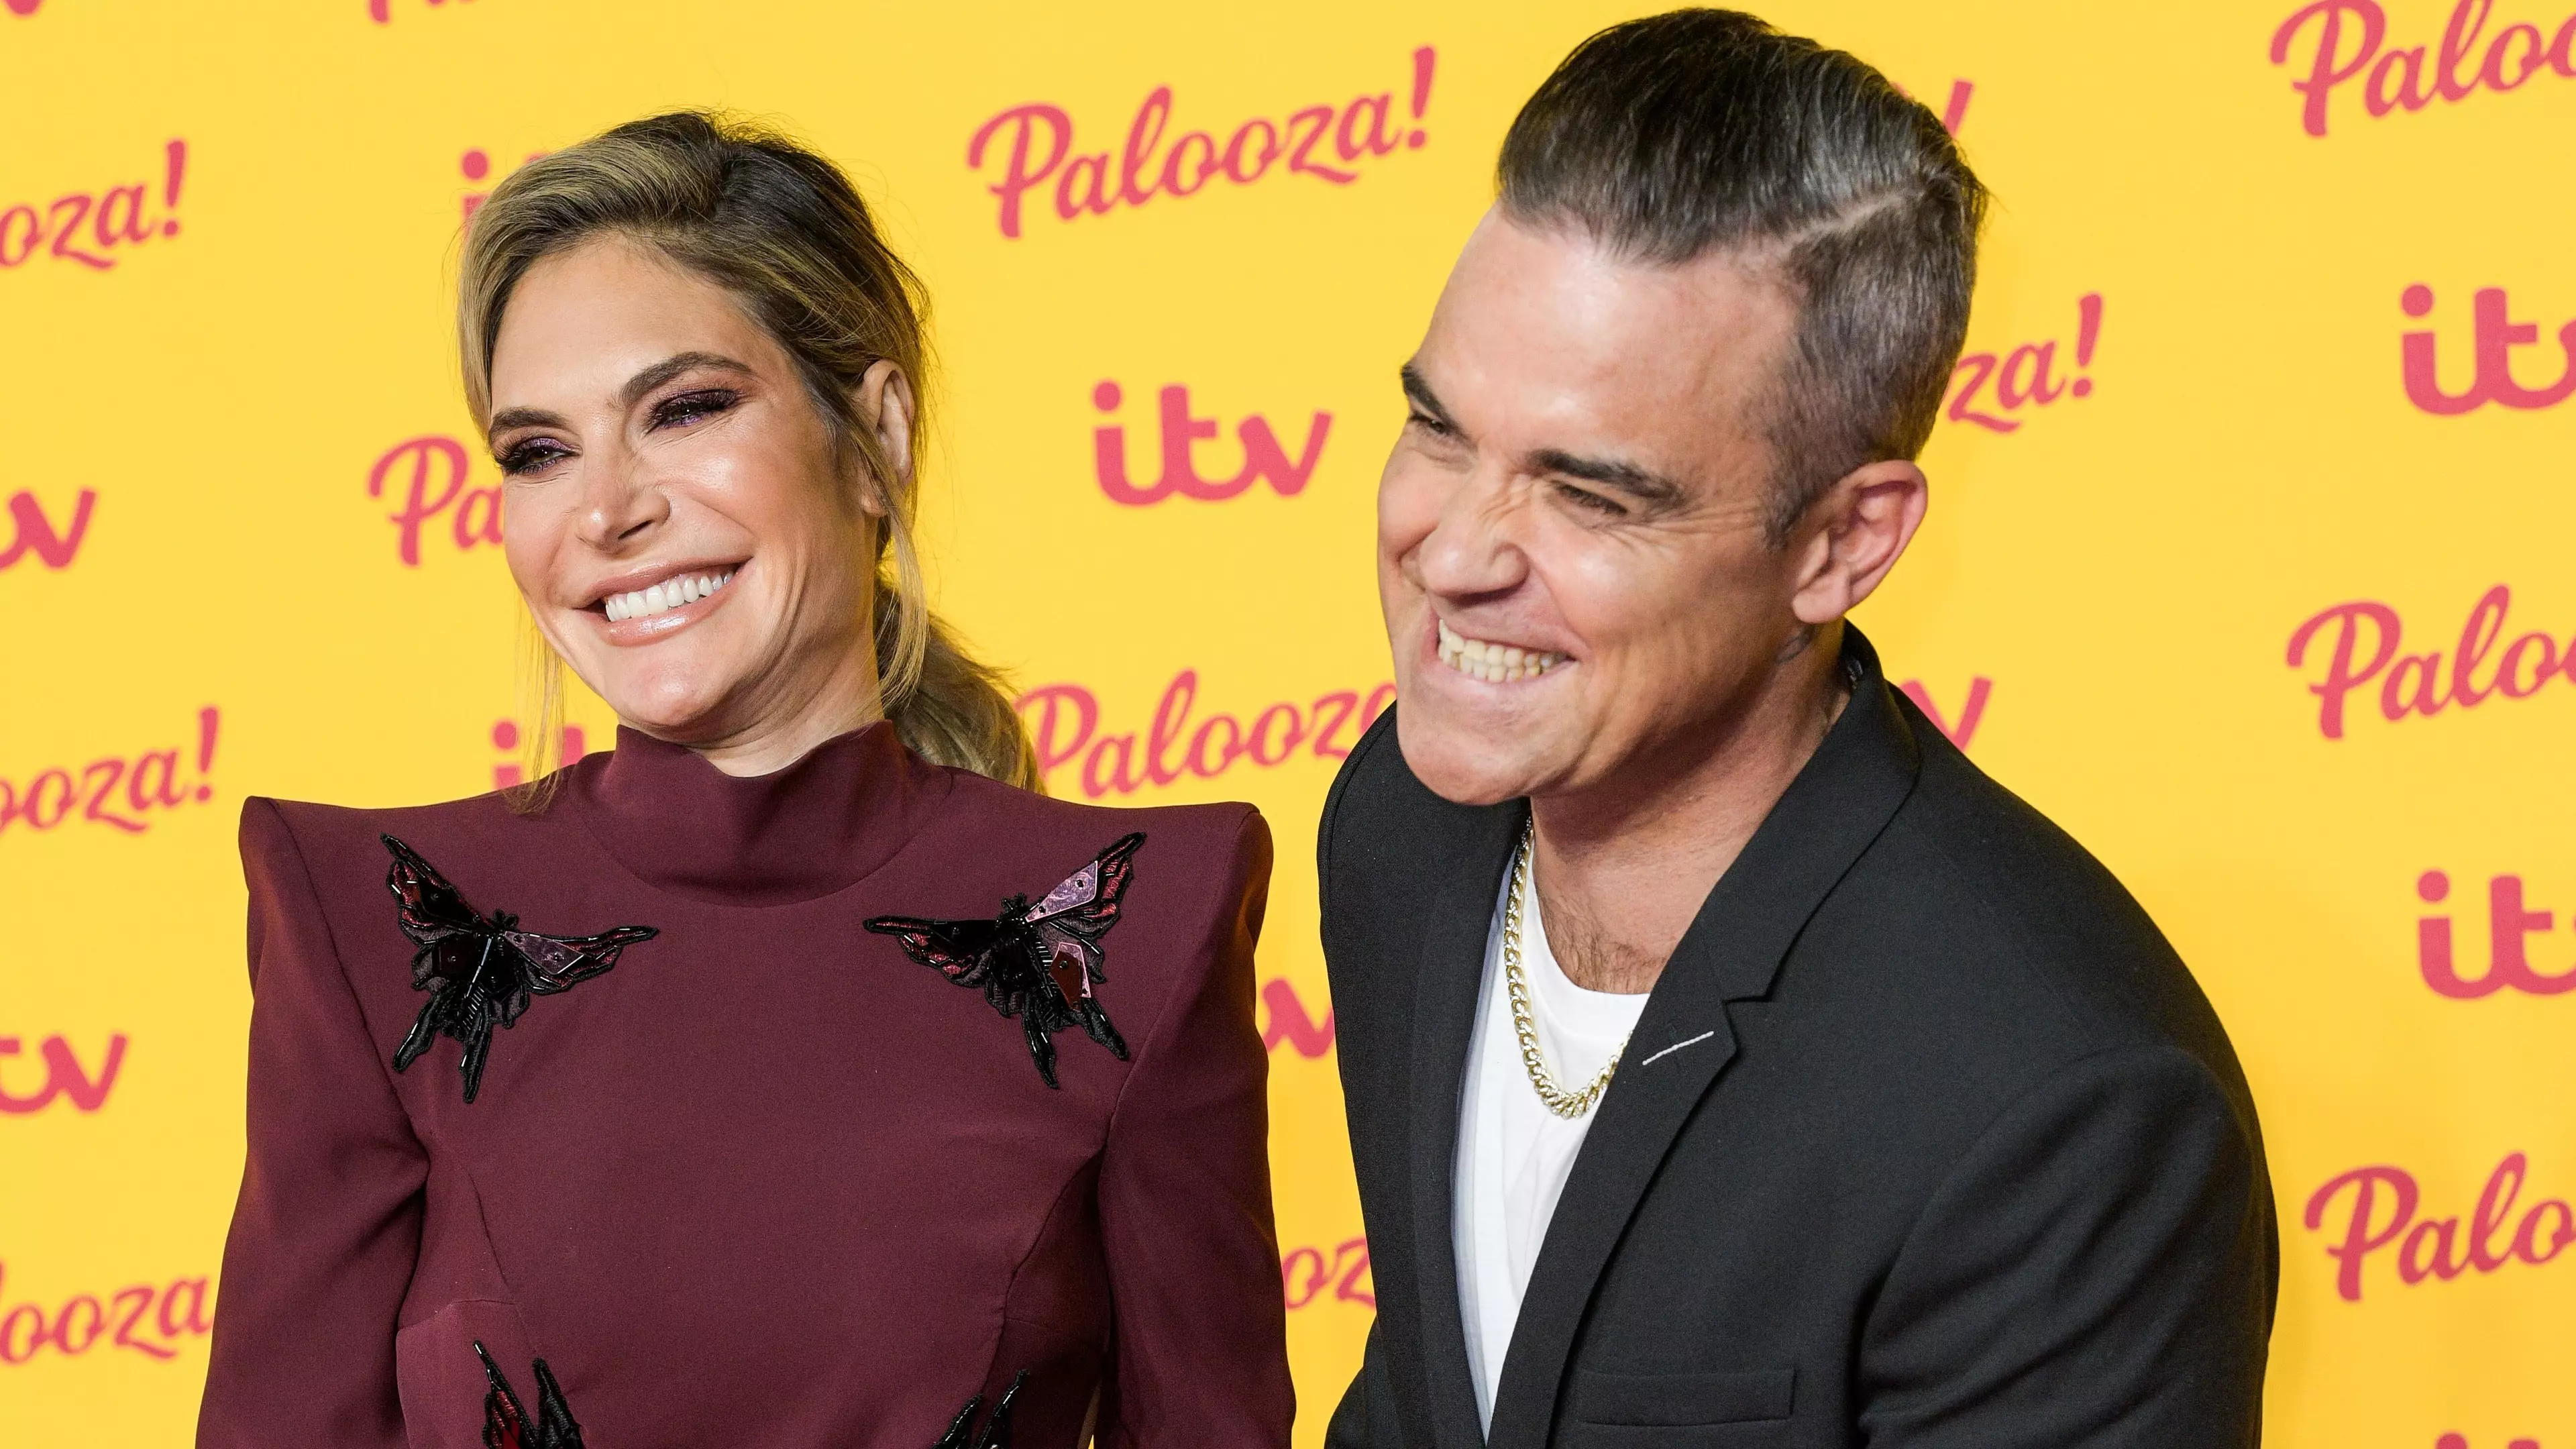 Robbie Williams Proposes To Ayda Field Again On Her 40th Birthday